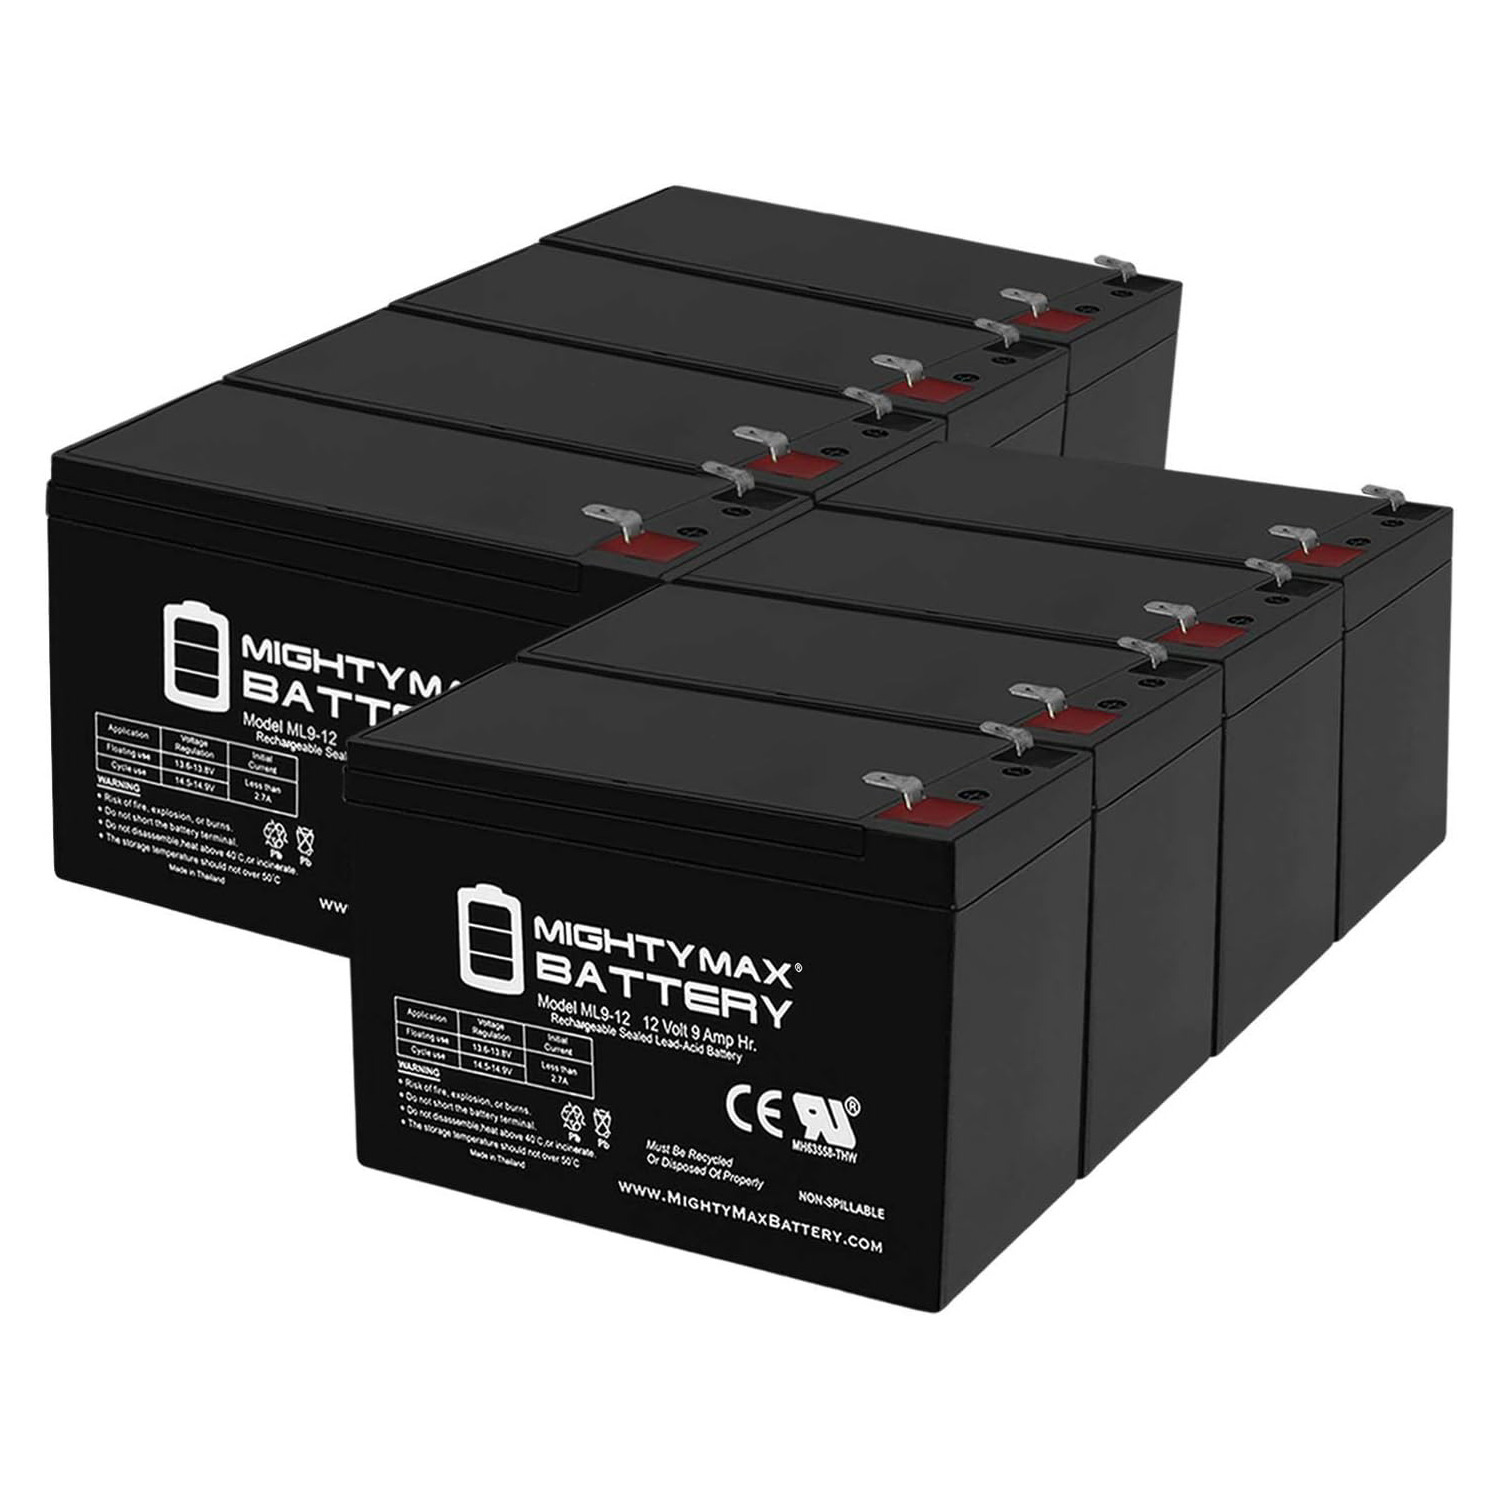 Altronix SMP3PMCTXPD4 12V, 9Ah Lead Acid Battery - 8 Pack